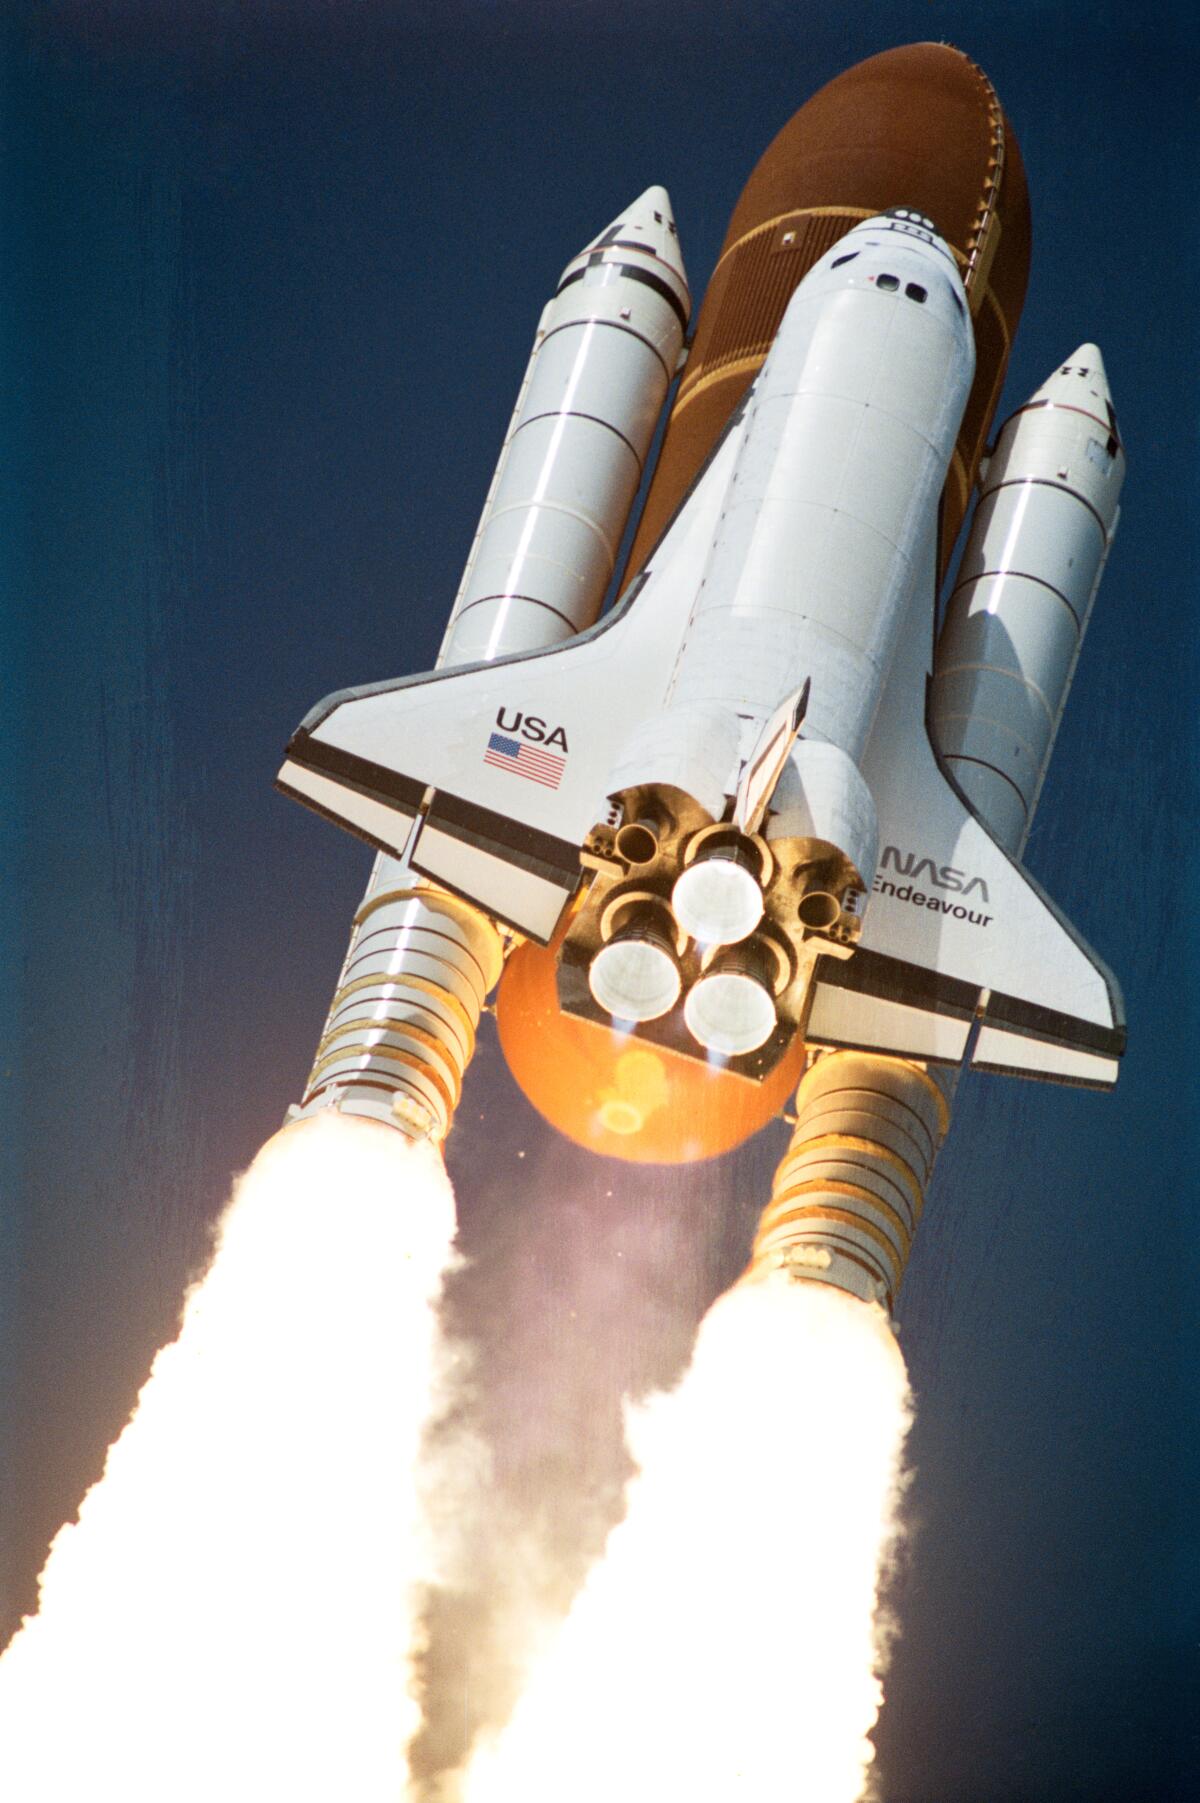 space shuttle heads to space